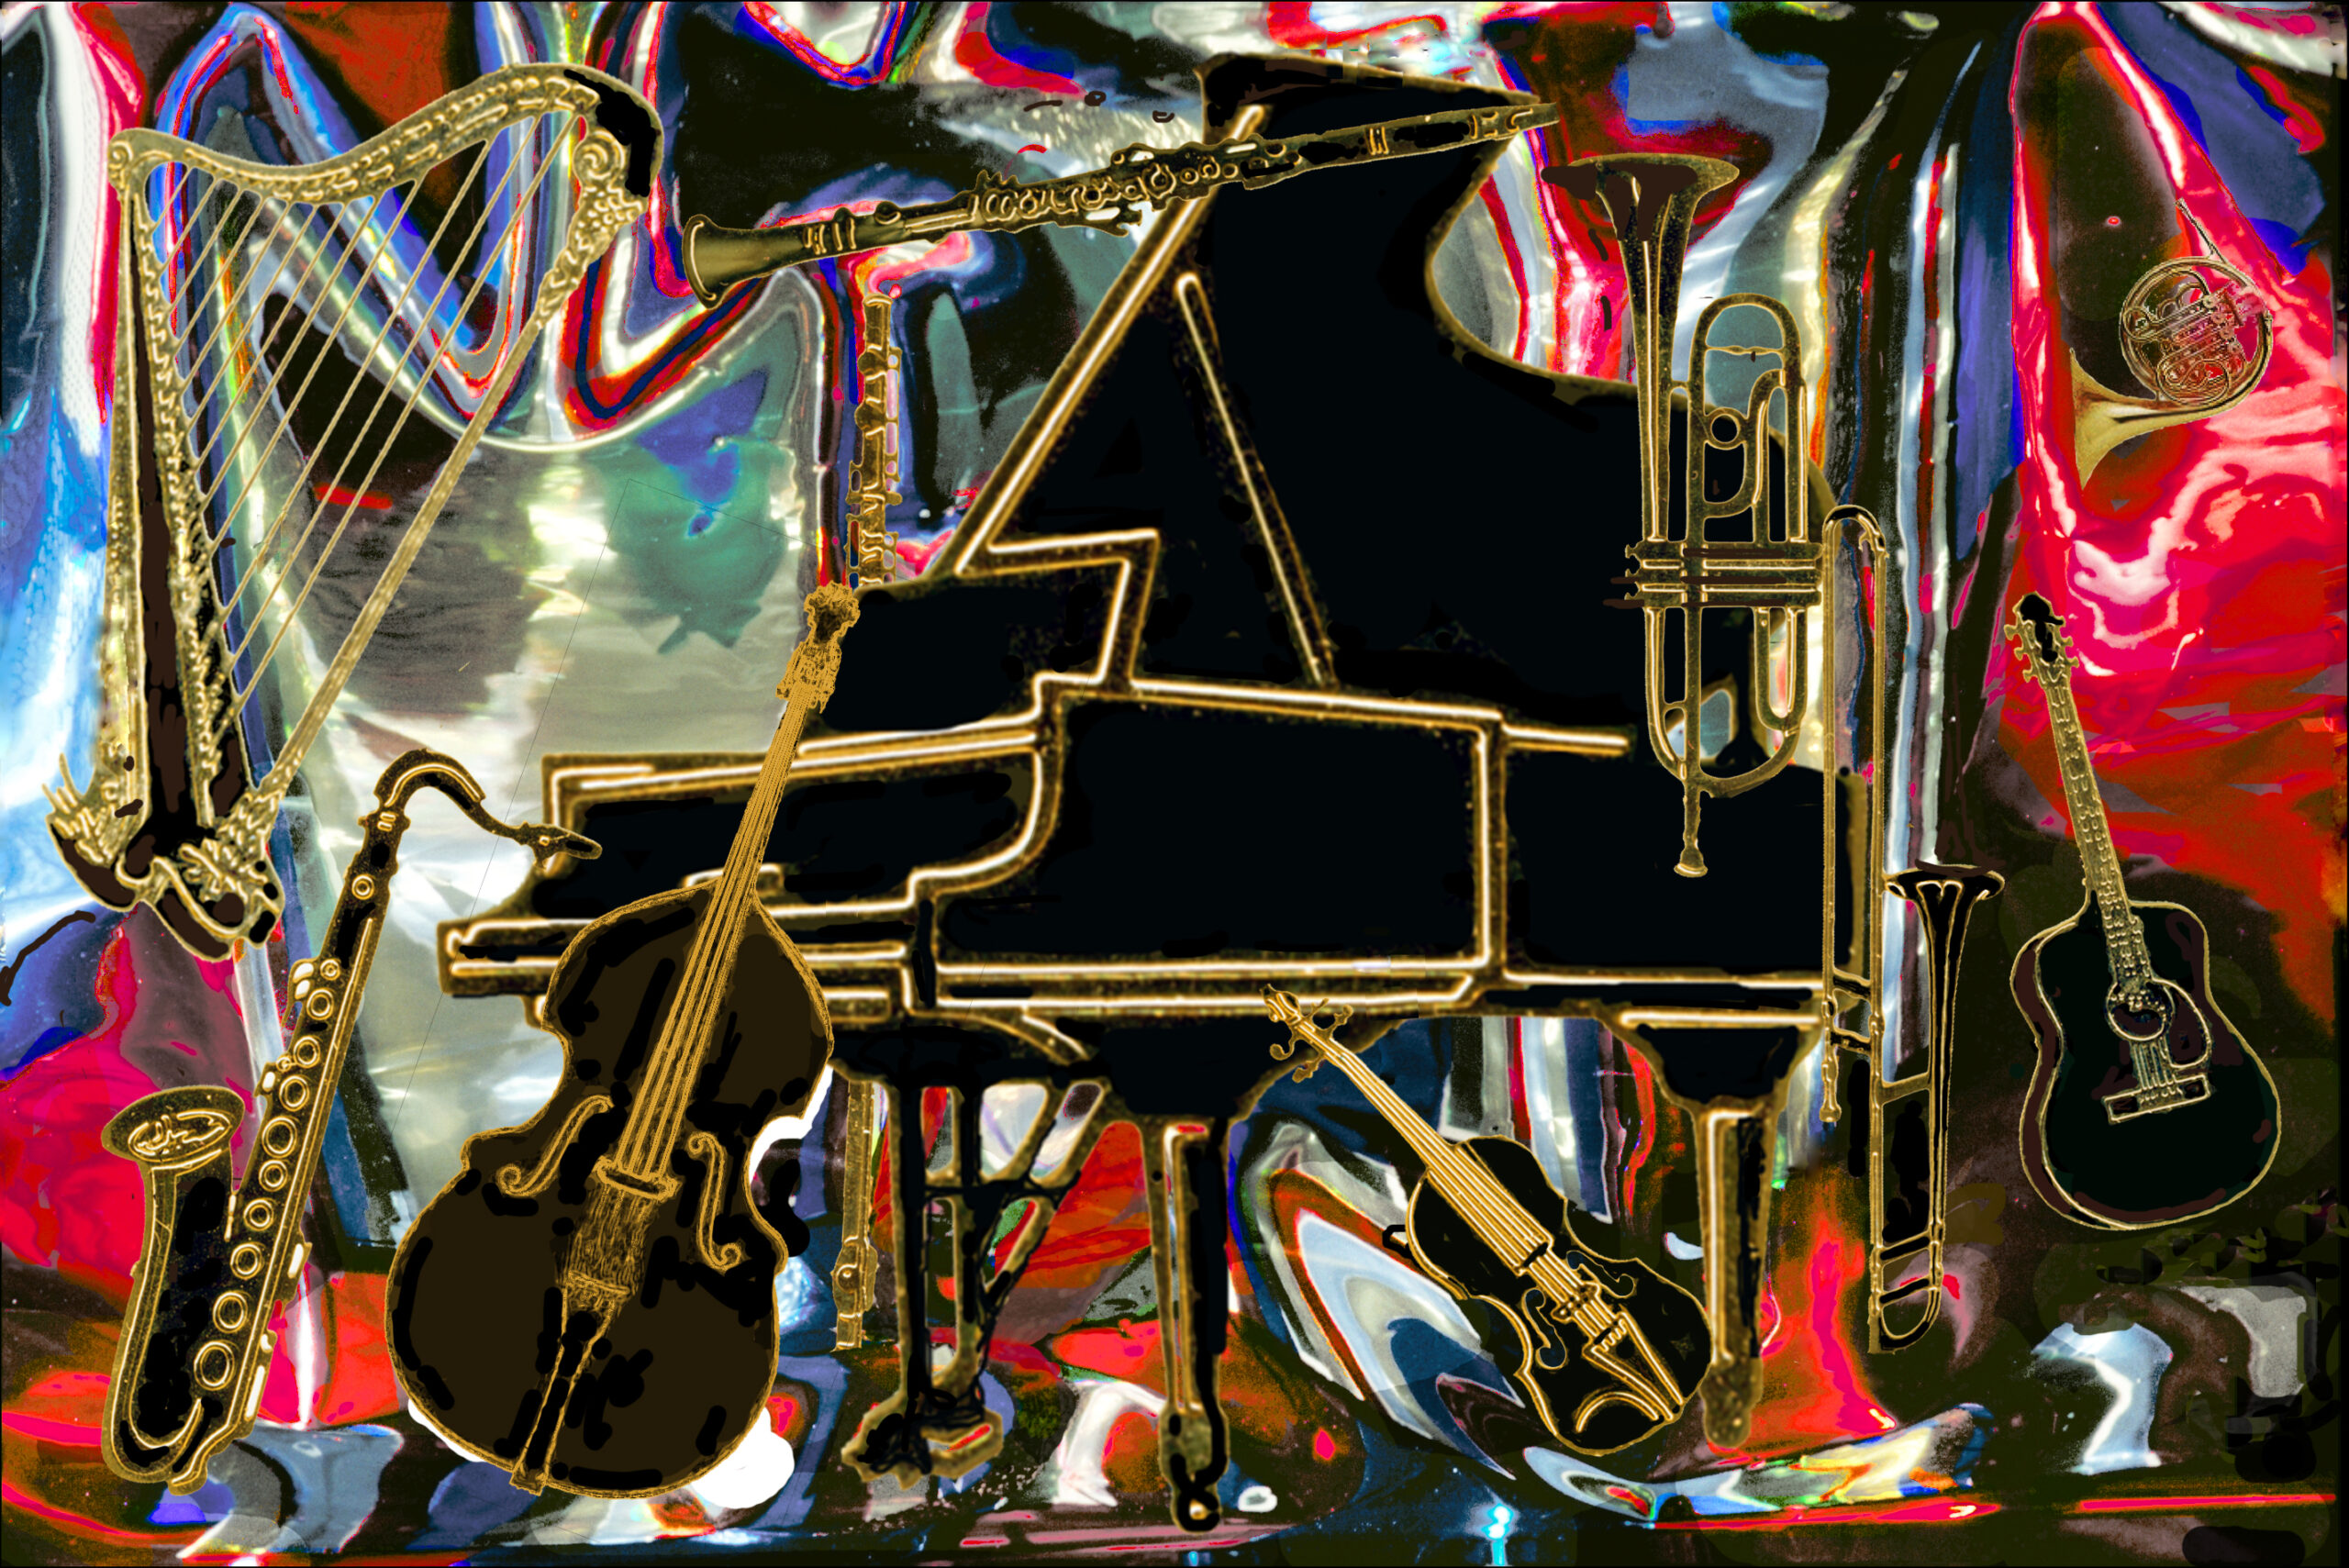 Black piano centred with surrounding instruments while abstract colours in the background.